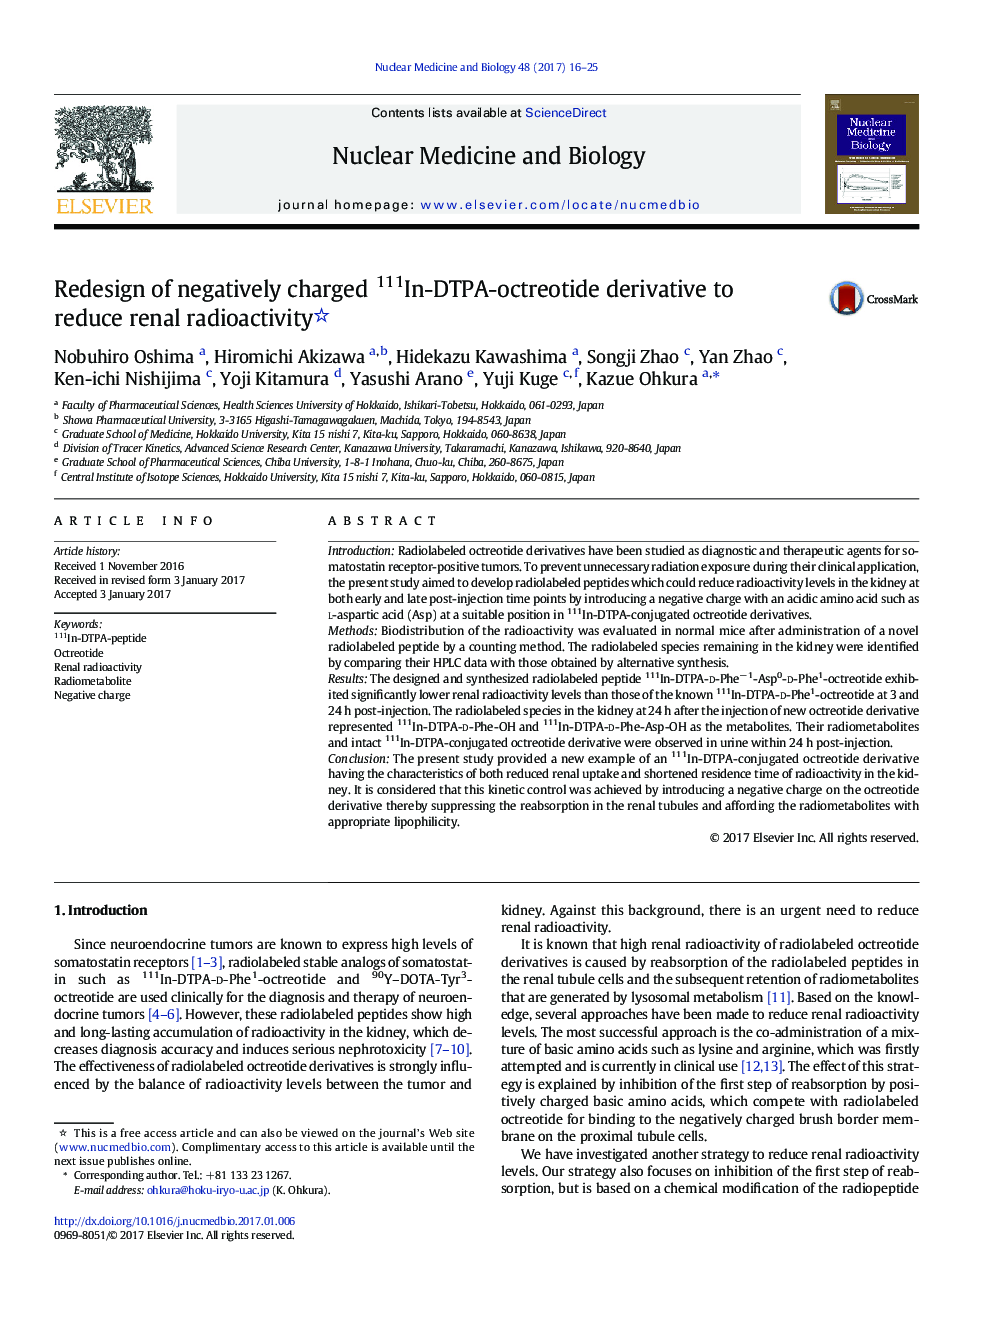 Redesign of negatively charged 111In-DTPA-octreotide derivative to reduce renal radioactivity